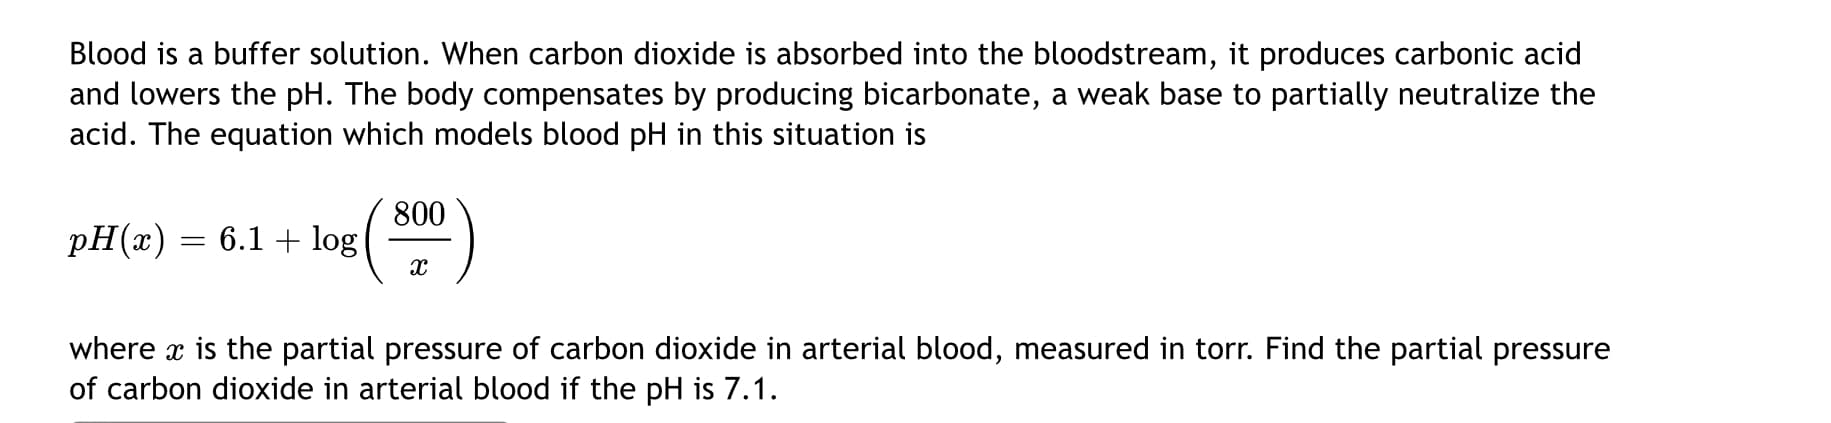 Blood is a buffer solution. When carbon dioxide is absorbed into the bloodstream, it produces carbonic acid
and lowers the pH. The body compensates by producing bicarbonate, a weak base to partially neutralize the
acid. The equation which models blood pH in this situation is
800
pH(x)
6.1 + log
%D
where x is the partial pressure of carbon dioxide in arterial blood, measured in torr. Find the partial pressure
of carbon dioxide in arterial blood if the pH is 7.1.
